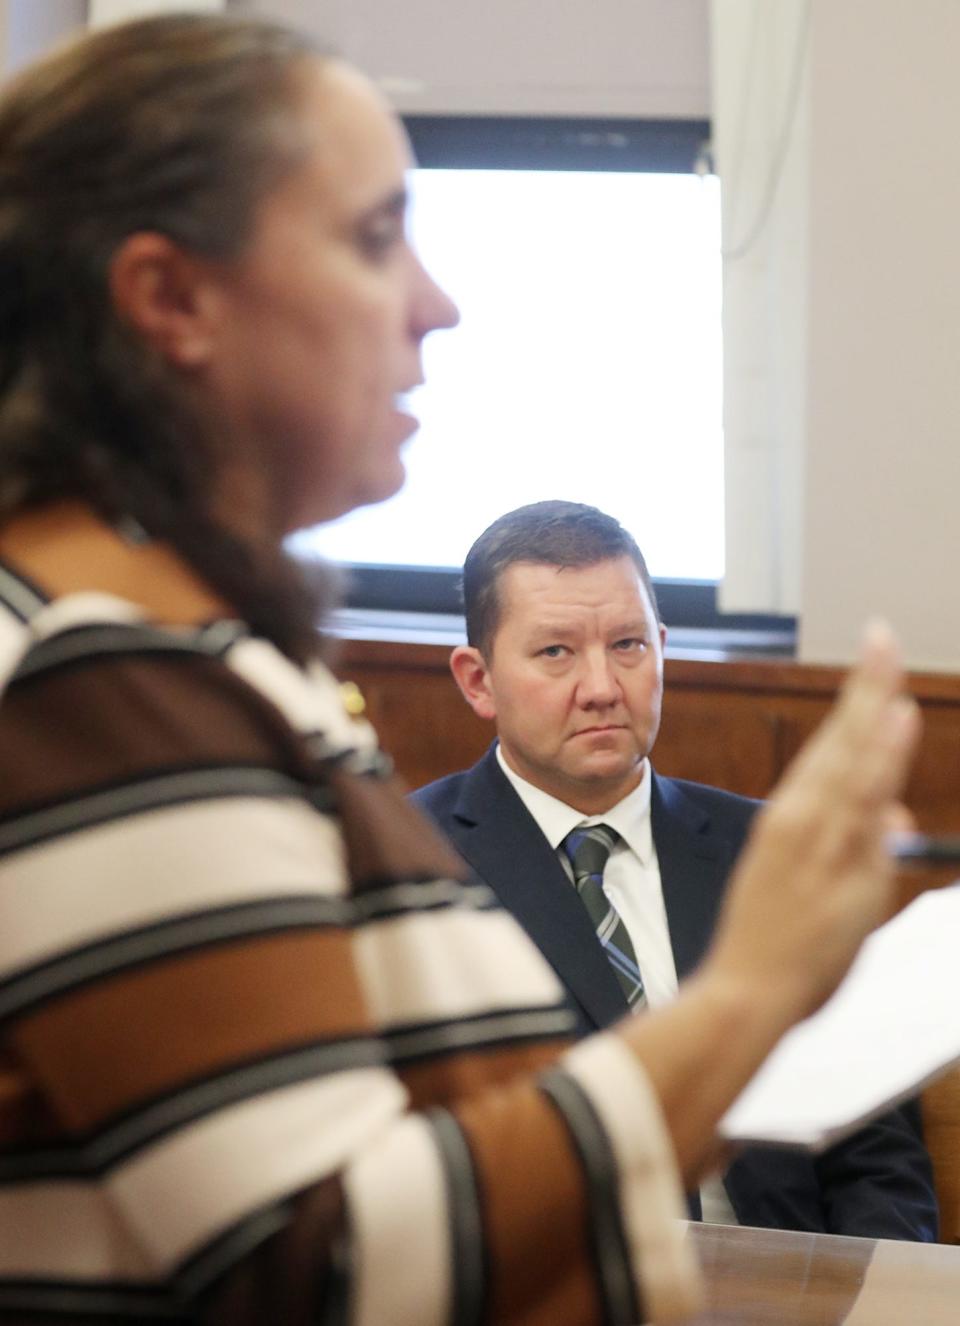 Assistant City Prosecutor Jennifer Roberts gives her opening statement as former state Rep. Bob Young listens during his bench trial in Barberton Municipal Court on Tuesday for assault and domestic violence.